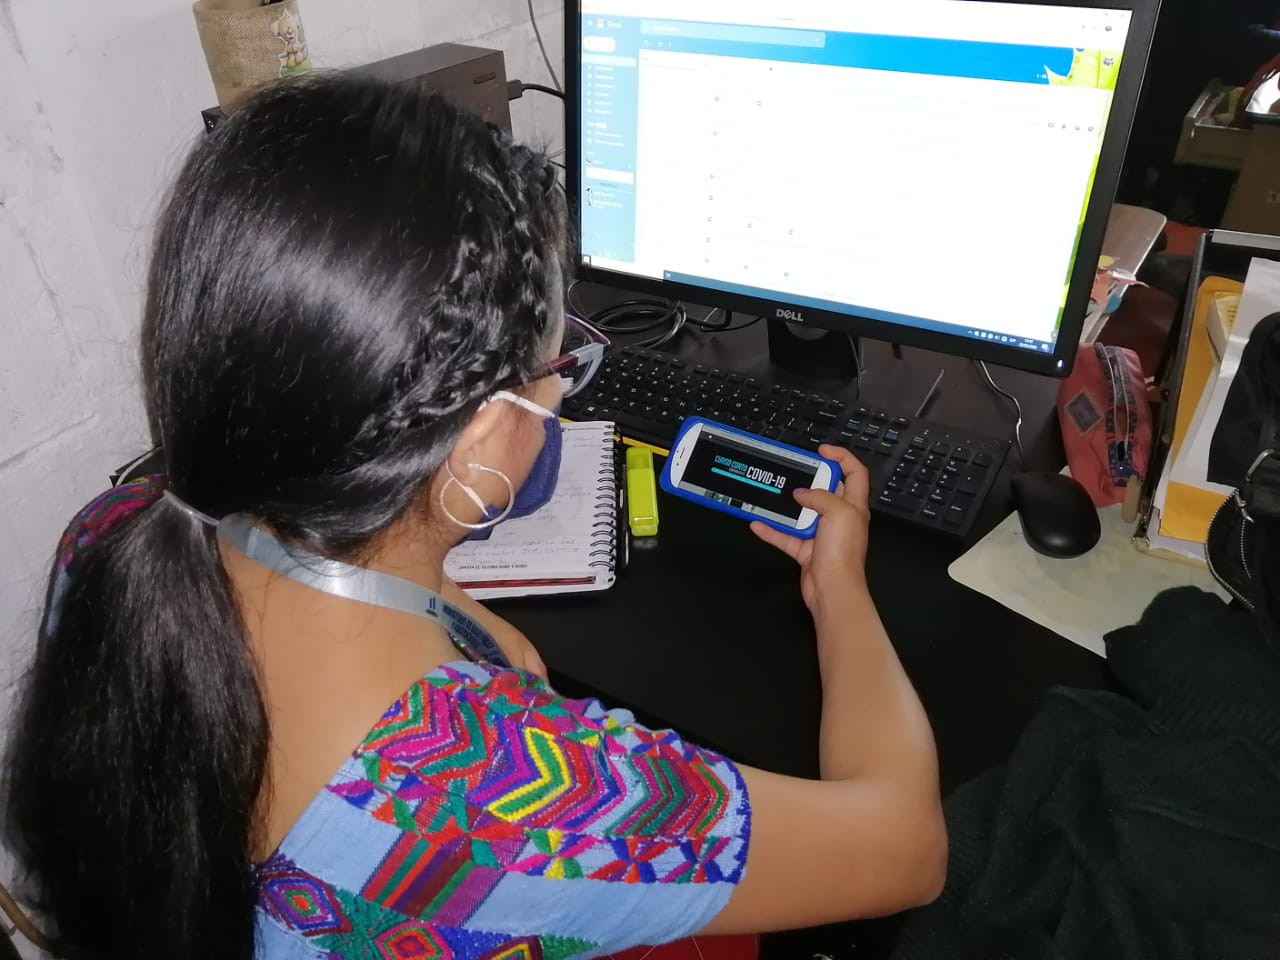 Health worker at desk uses her mobile telephone to watch micro-training course on COVID-19.